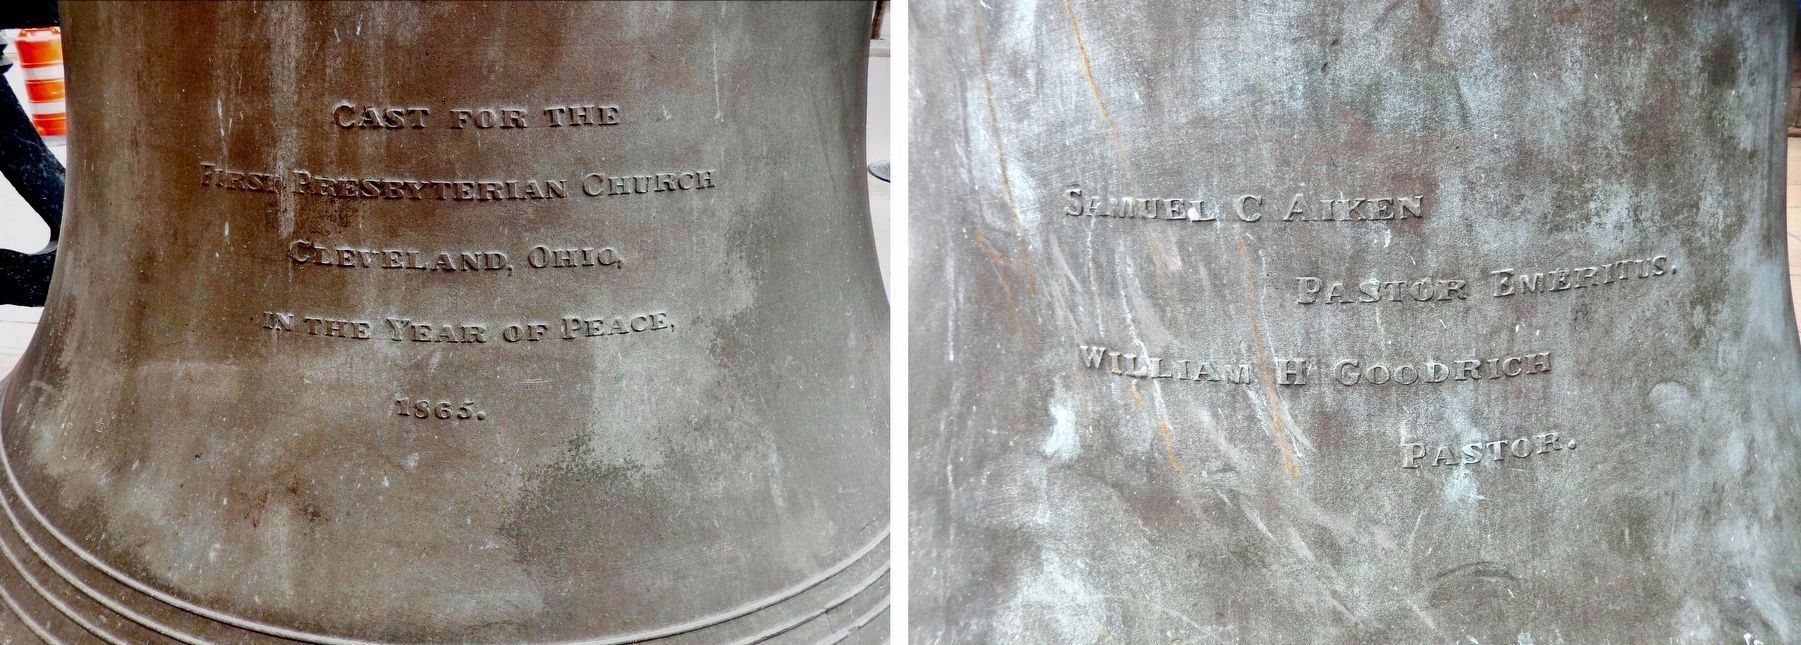 Old Stone Church Bell Inscription image. Click for full size.